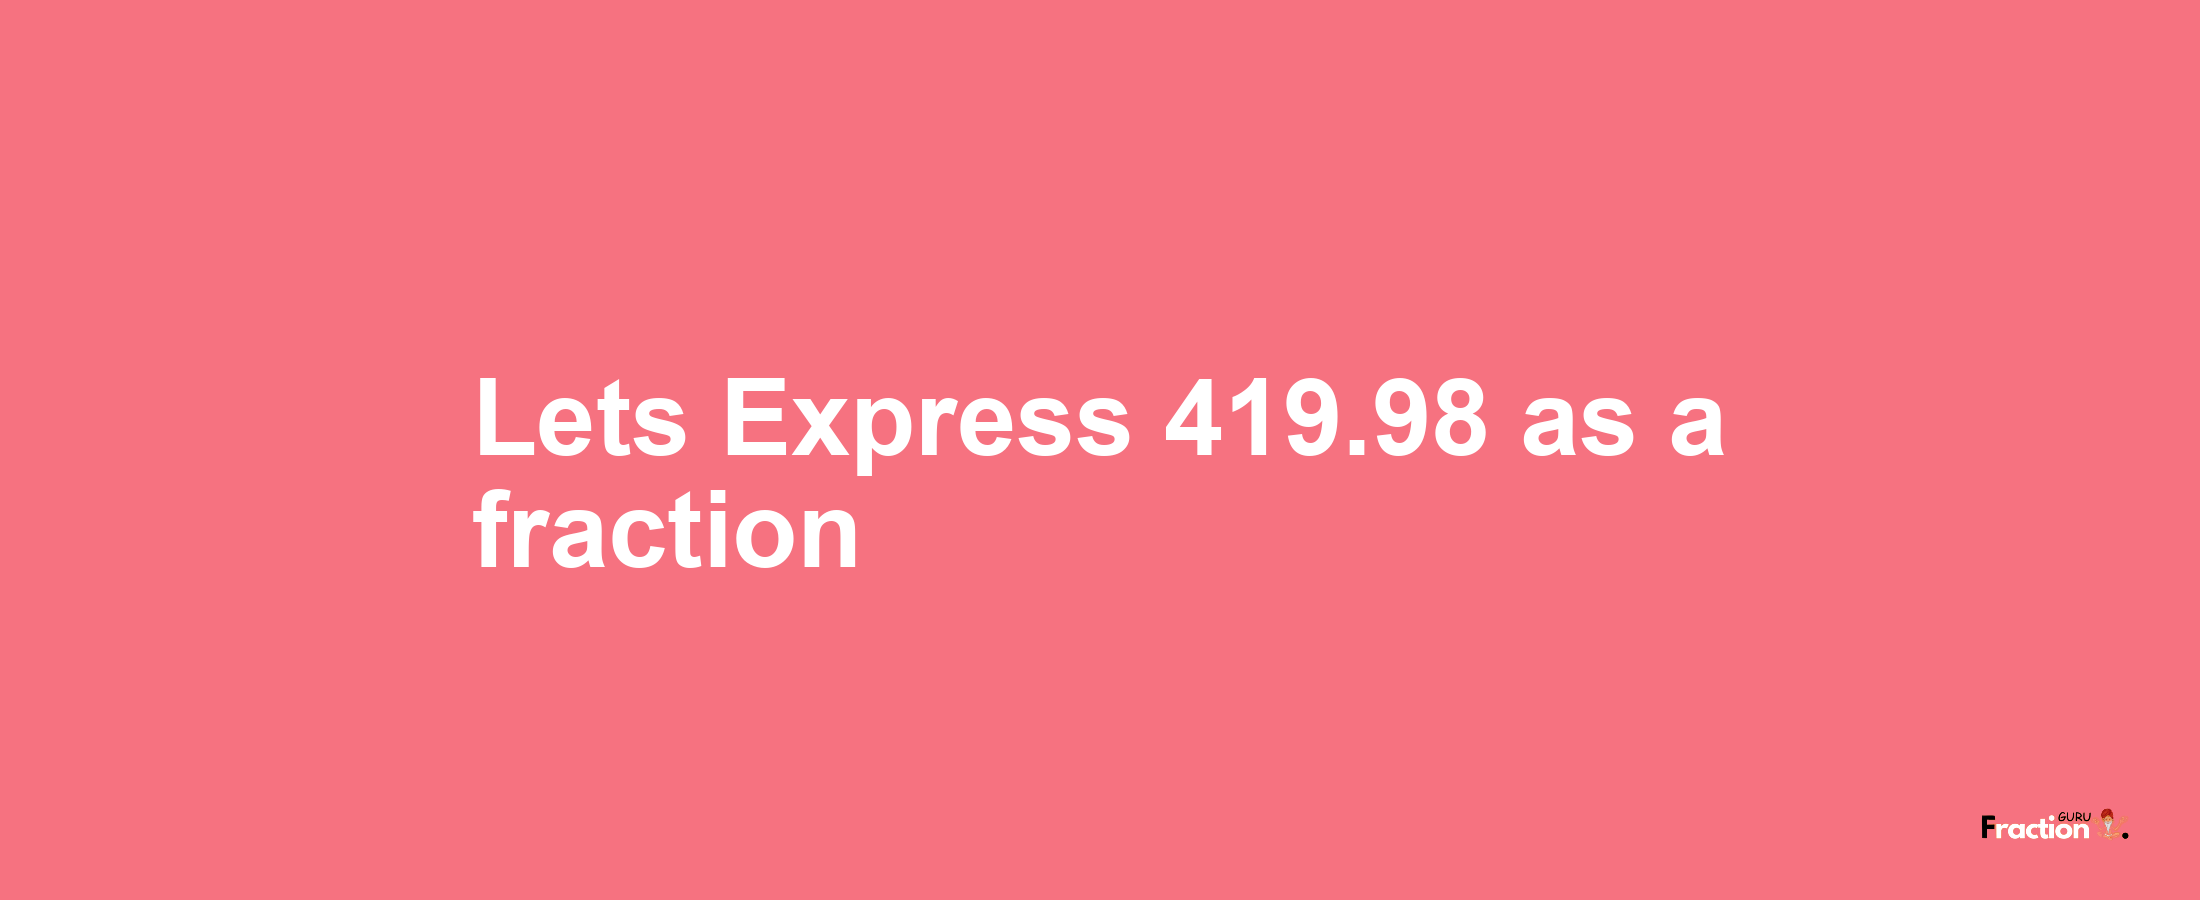 Lets Express 419.98 as afraction